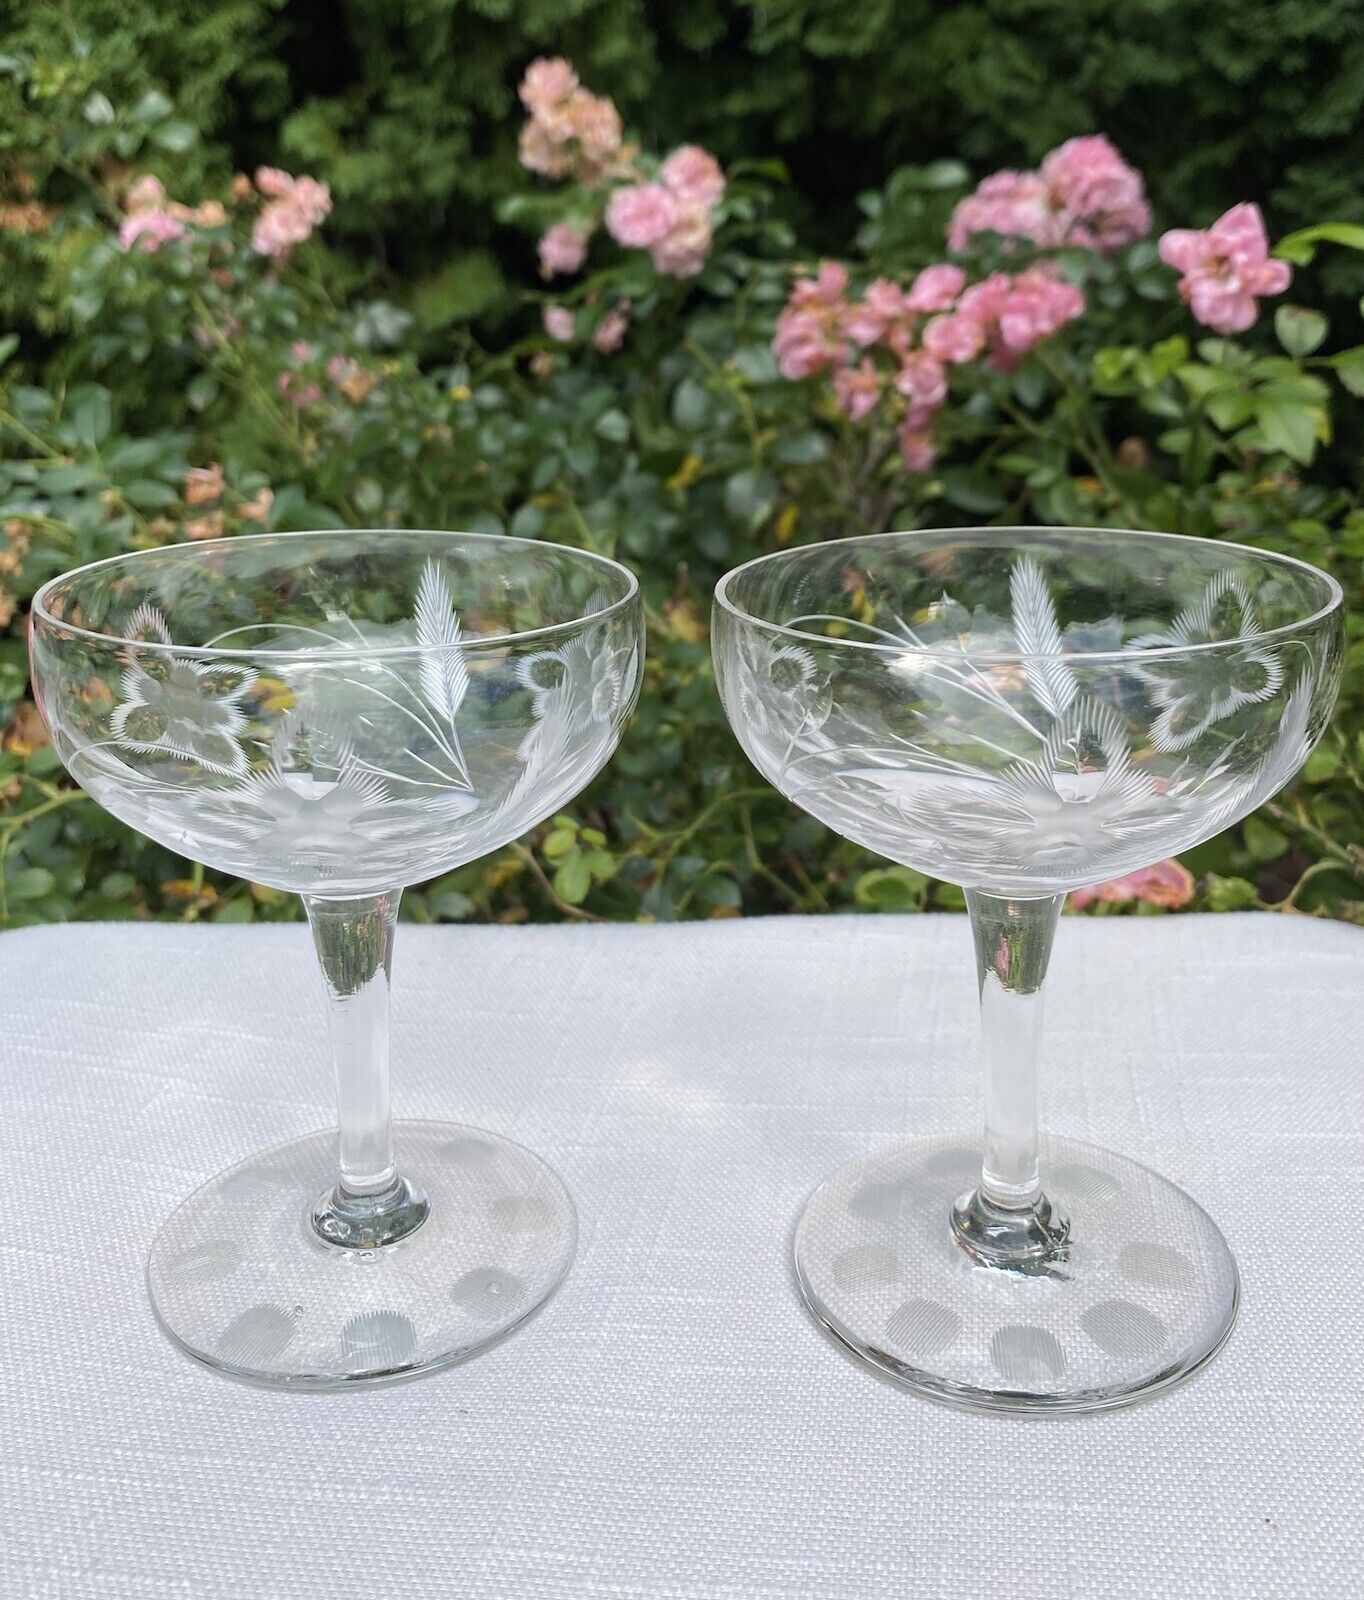 Set of 2 Etched Champagne Coupe Glasses Floral Wheat Dot Pattern 4 Ounce 4.5”